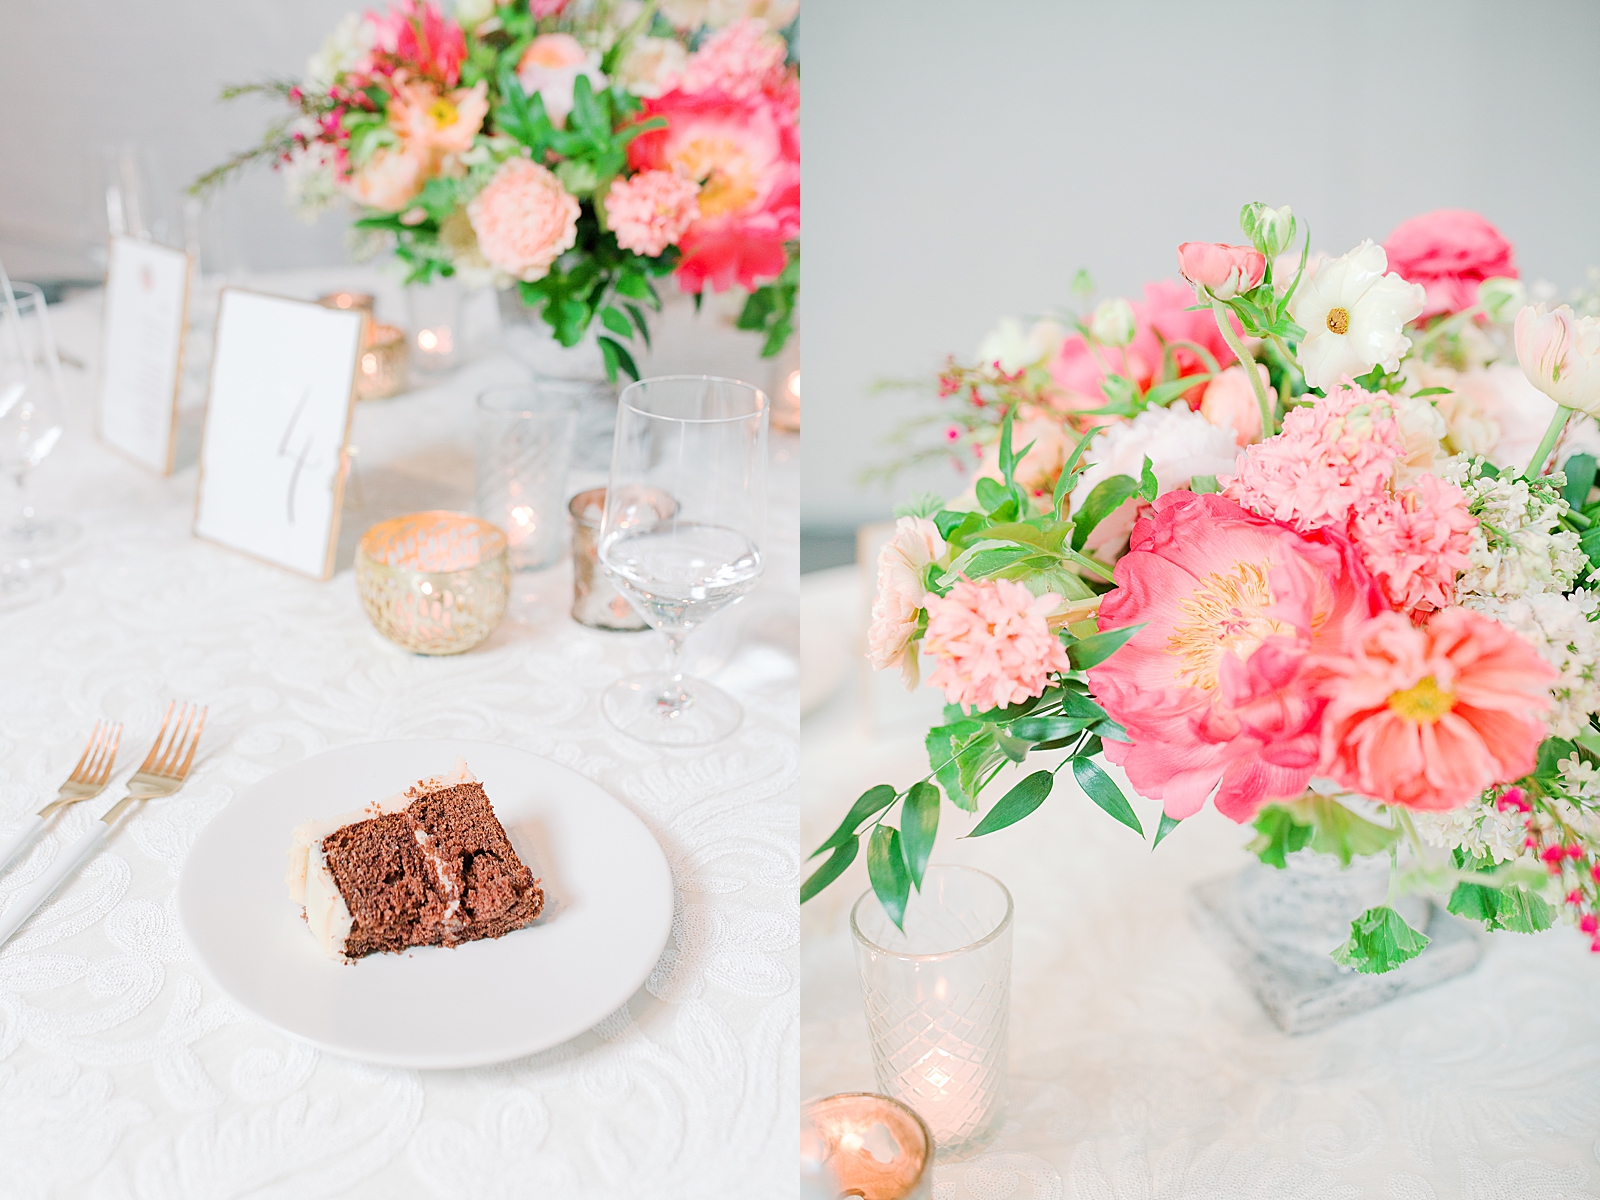 Spring Brickyard Wedding Reception Table with a piece of cake and Table Centerpiece Photos